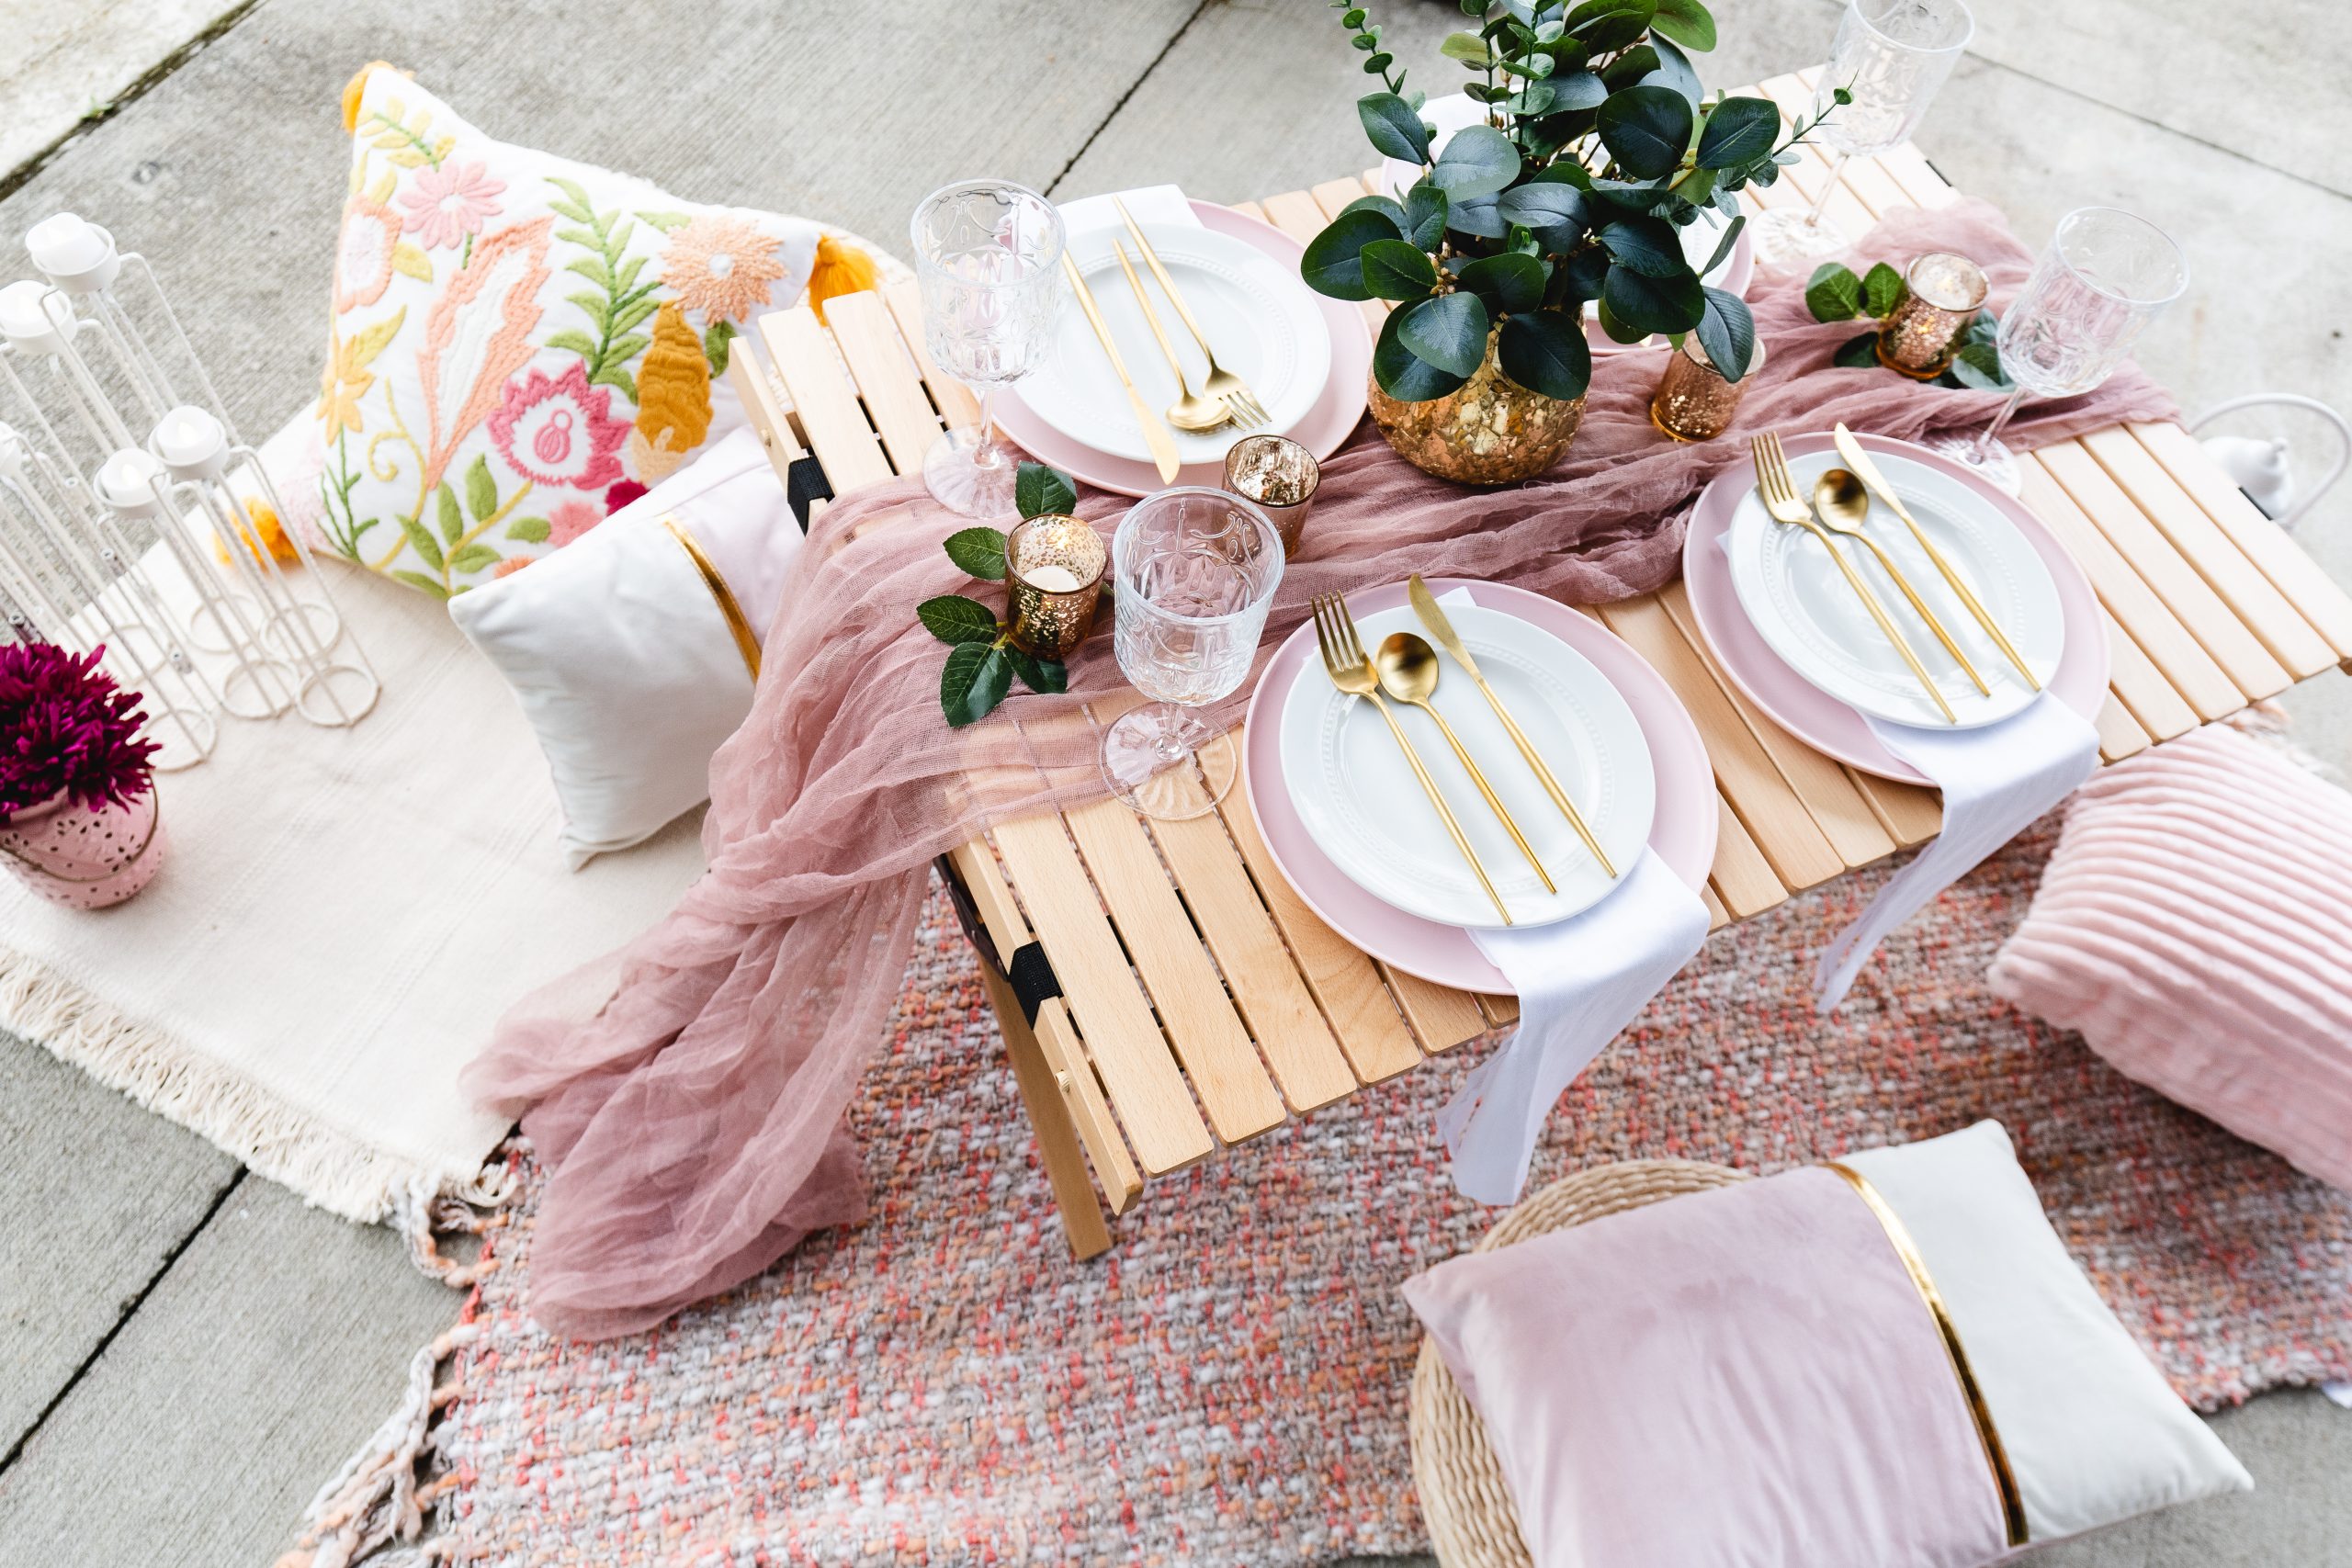 These Four Luxury Picnic Companies Can Help You Plan The Perfect Outing Cincinnati Magazine